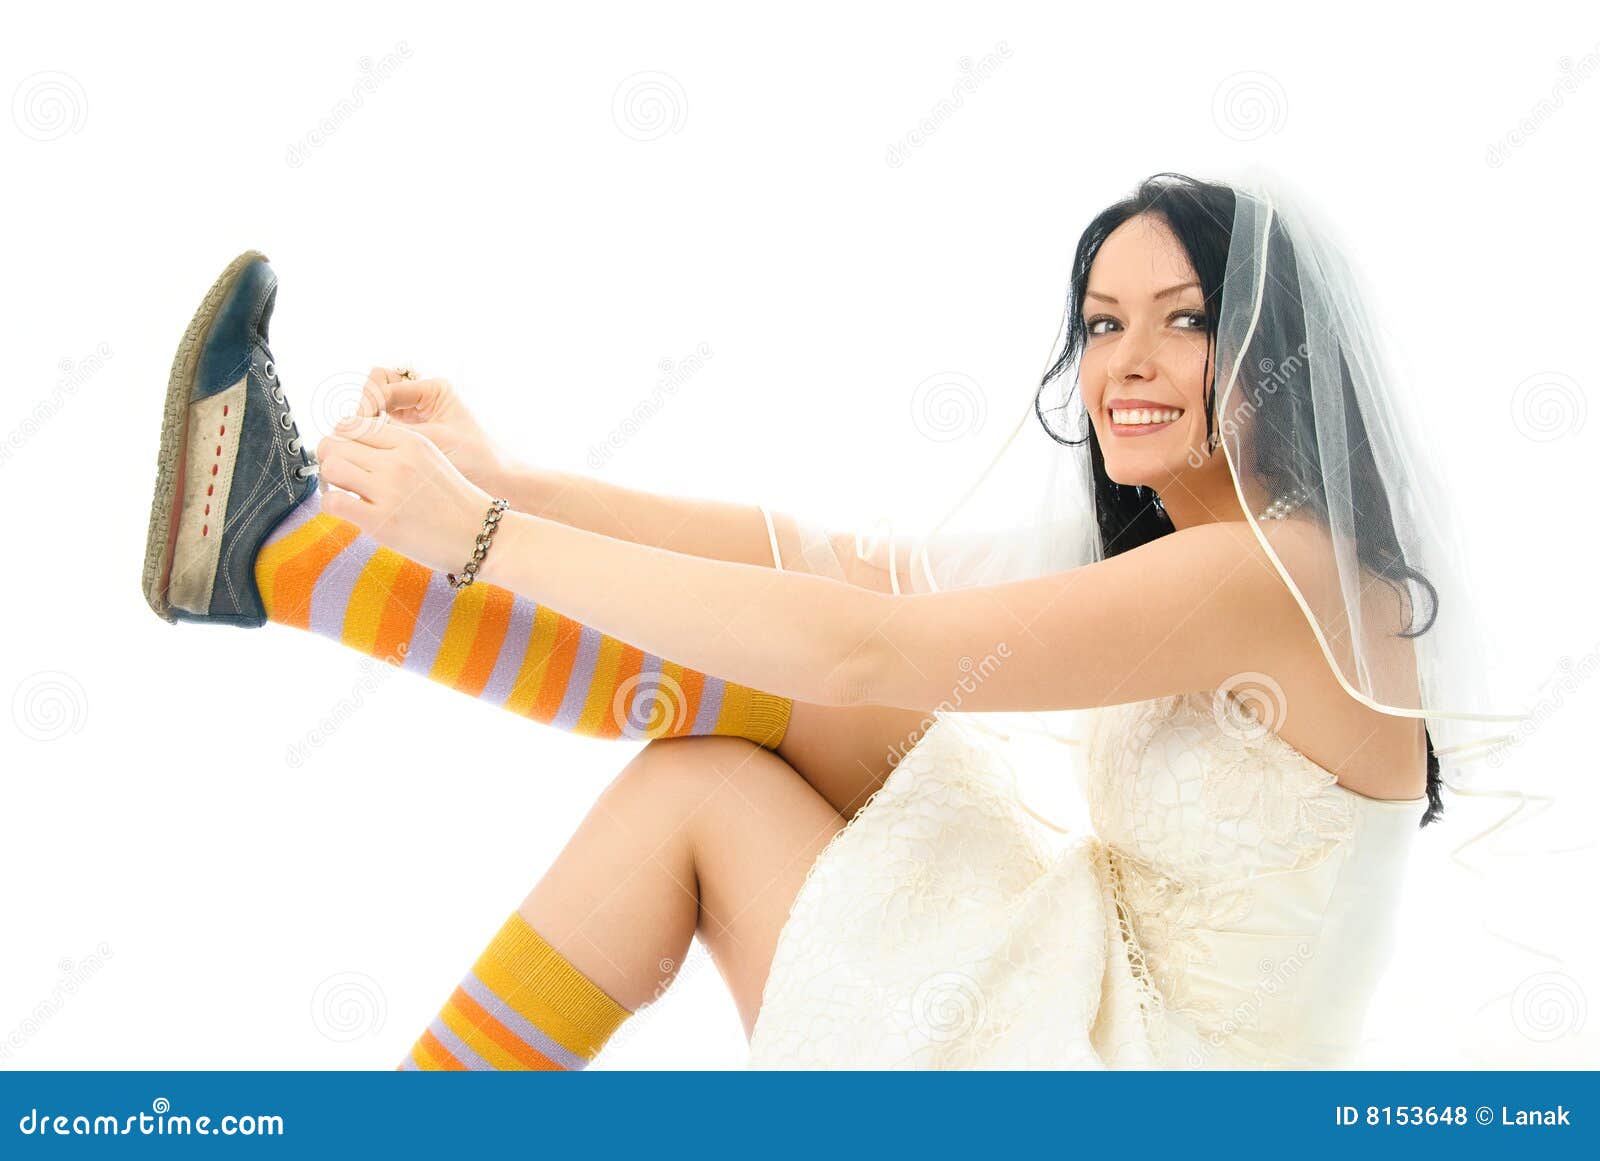 happy bride putting on sporting shoes